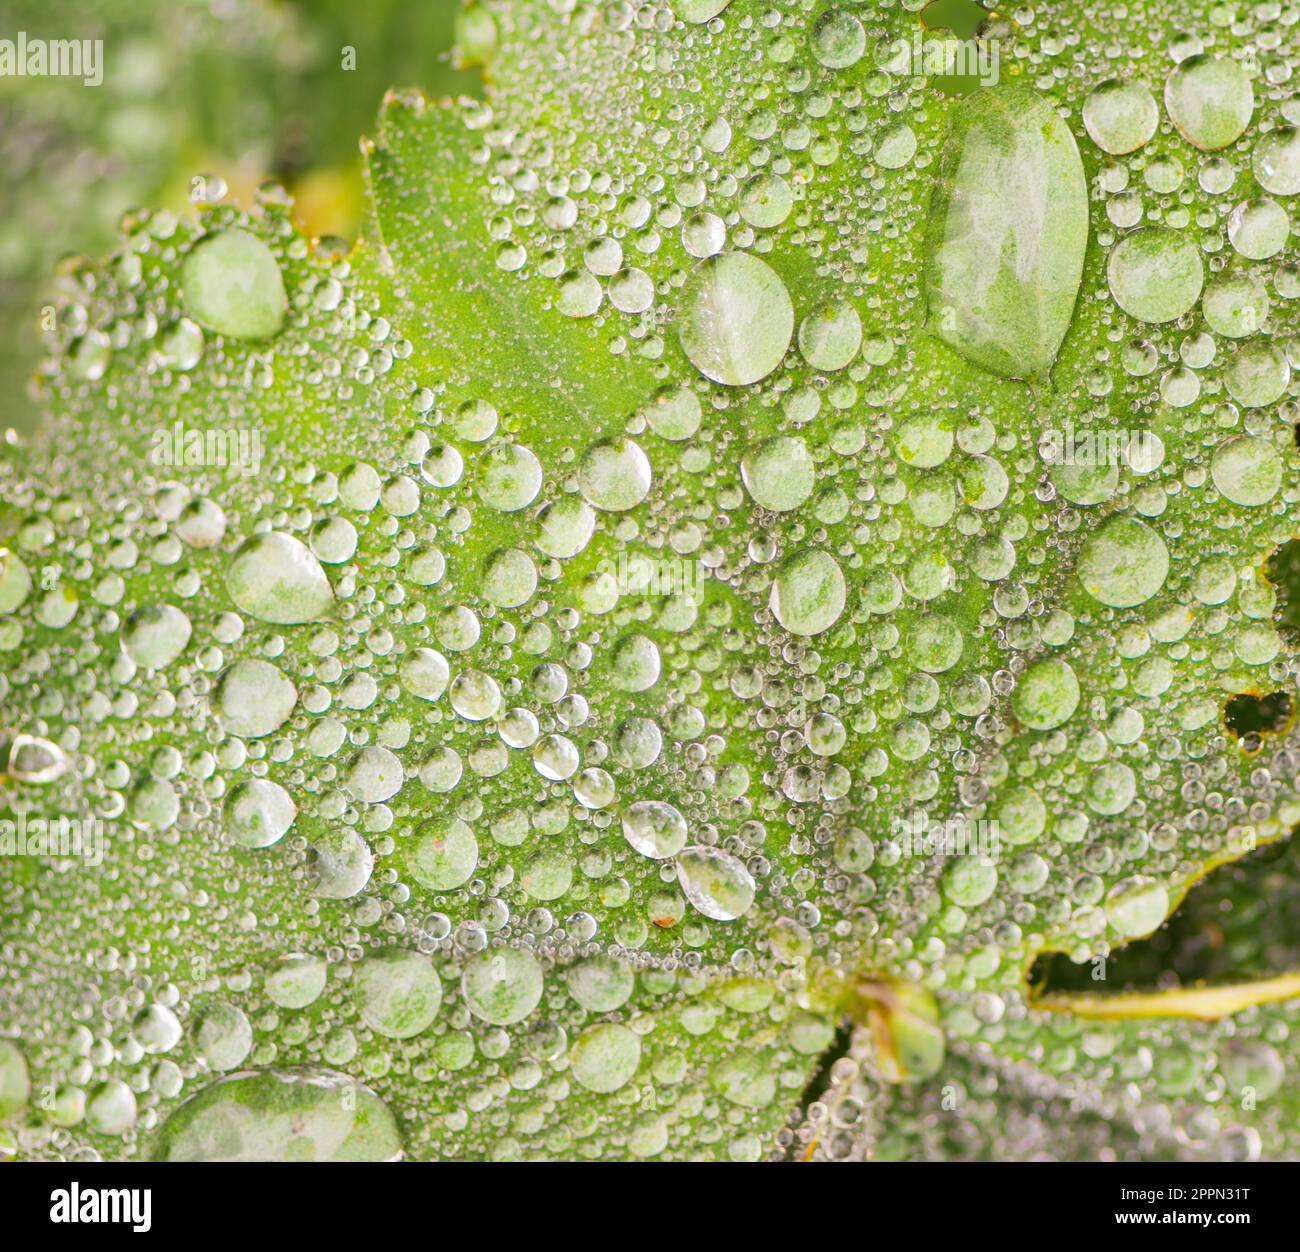 Macor of raindrops on a green leaf Stock Photo